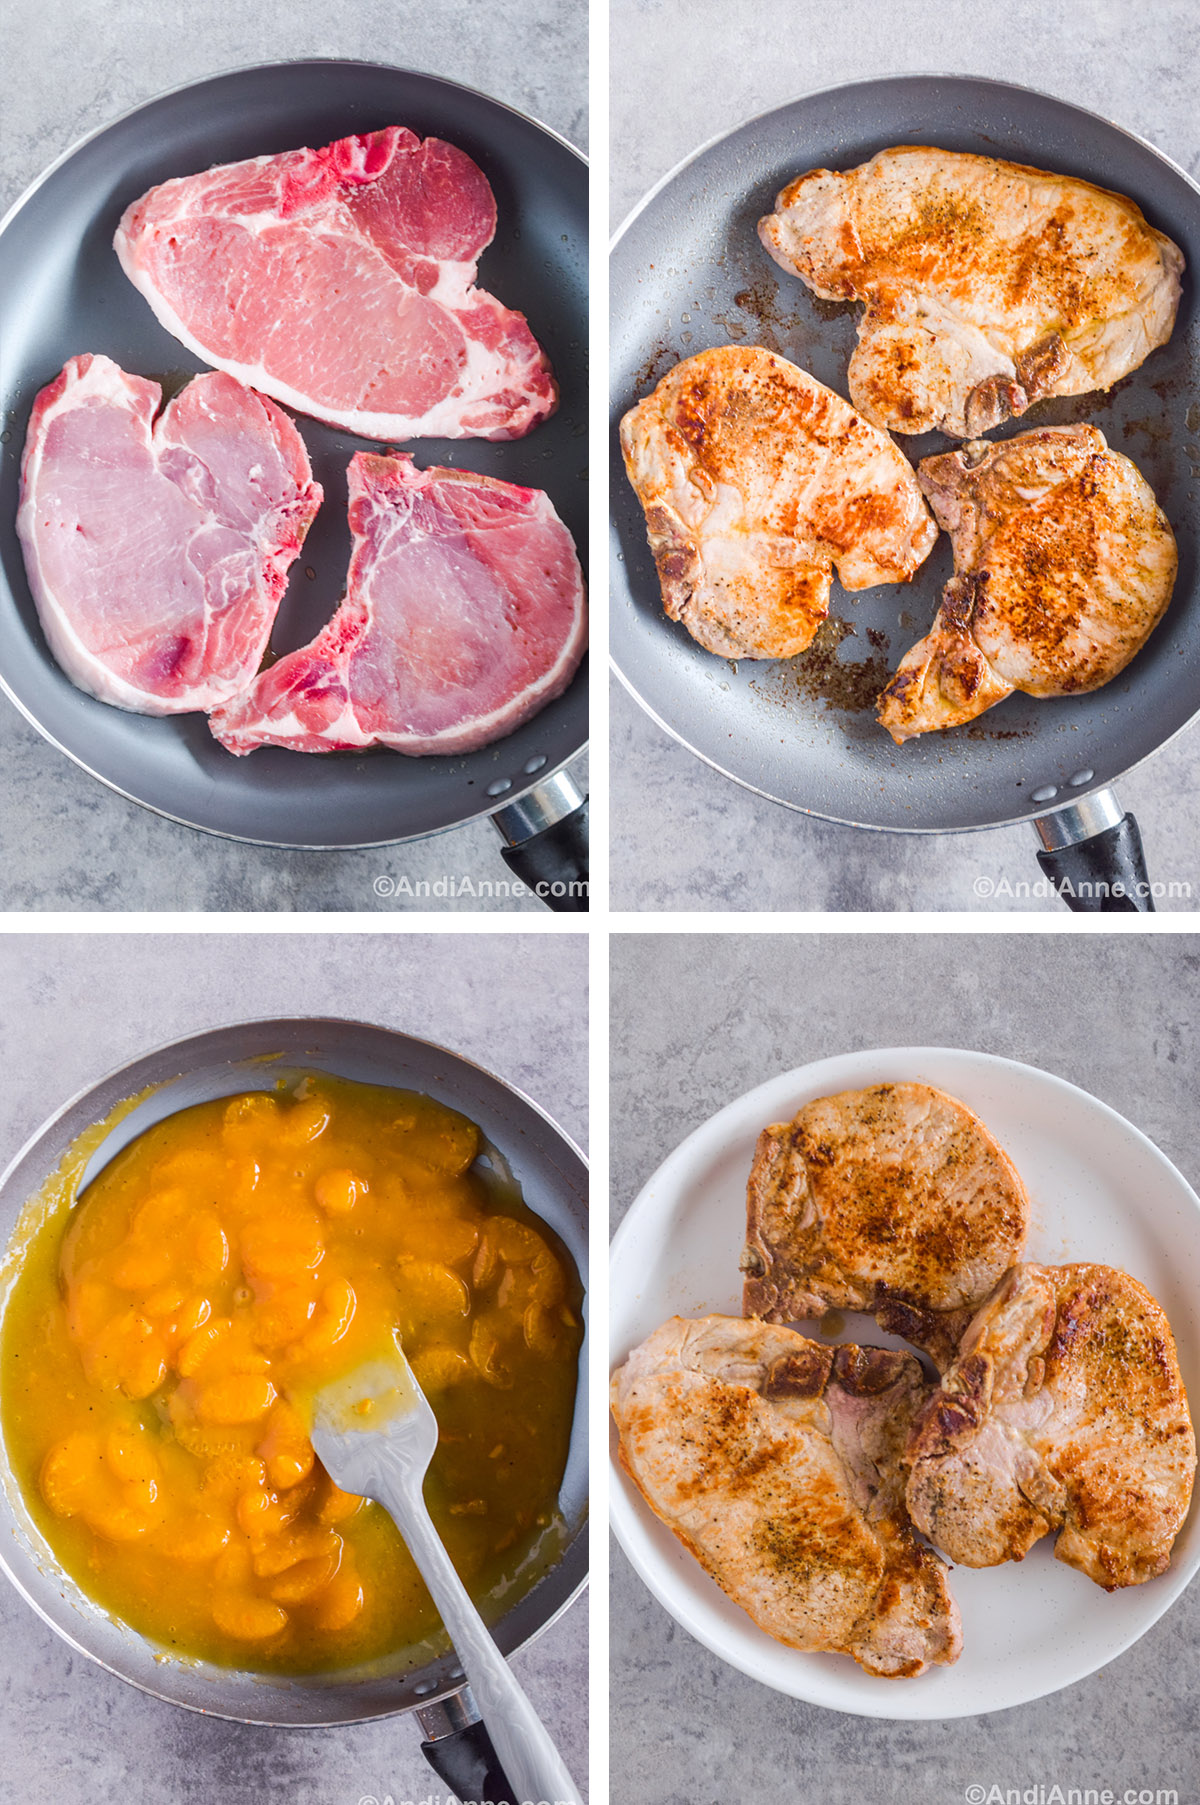 Four images grouped together. First is raw pork chops in a frying pan. Second is cooked pork chops. Third is orange sauce with canned mandarin oranges in frying pan. Fourth is cooked pork chops on a plate.